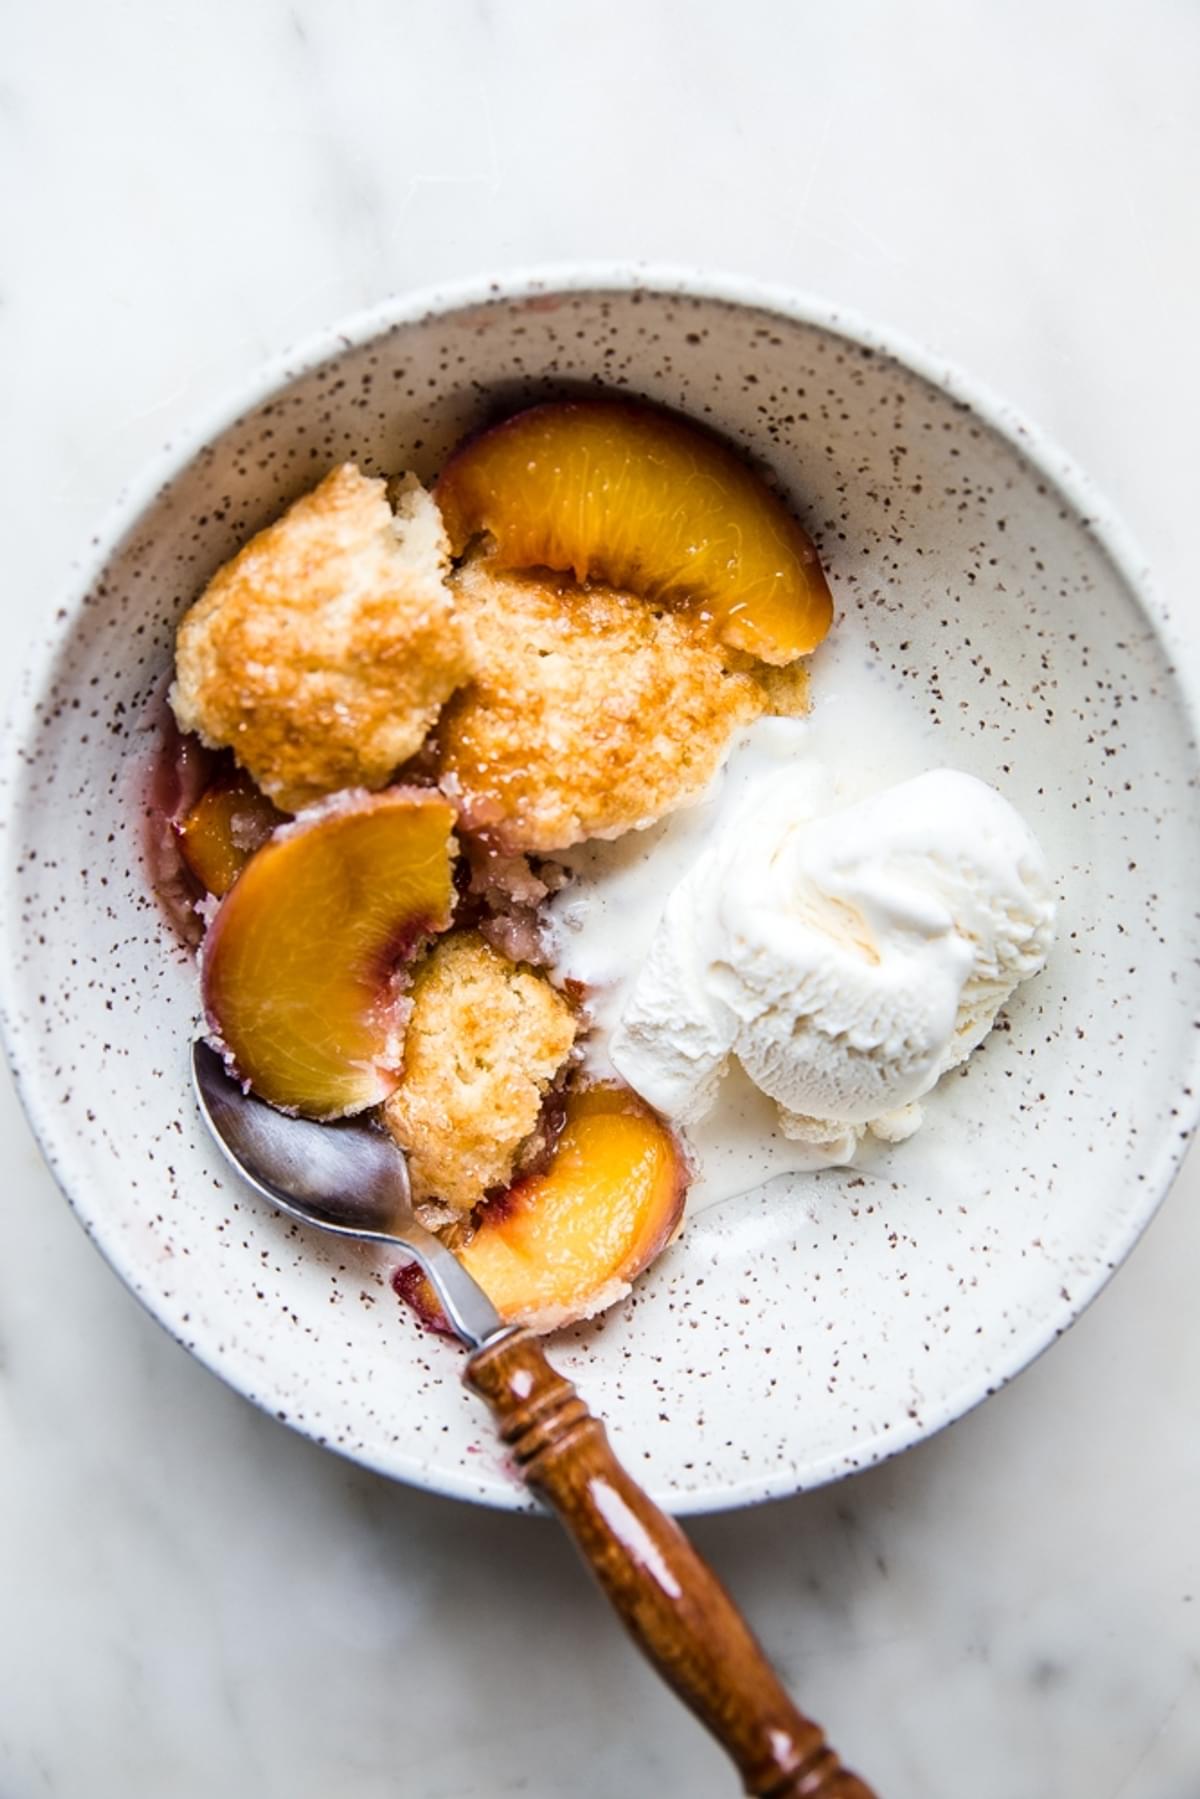 homemade peach cobbler in a bowl with a scoop of ice cream and a spoon.